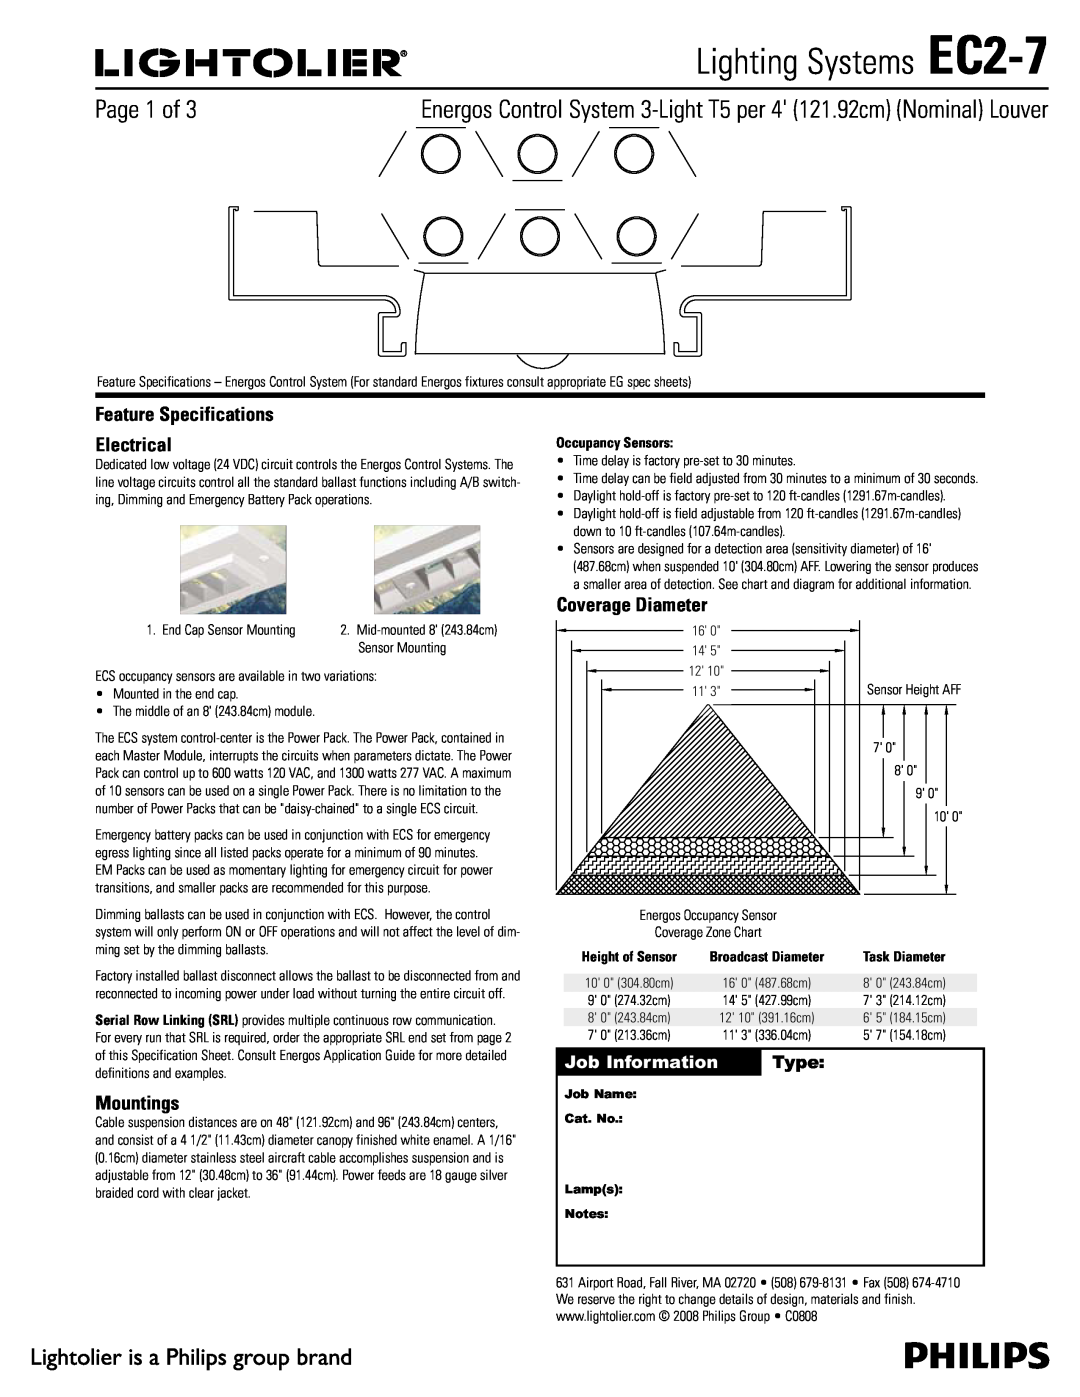 Lightolier specifications Lighting Systems EC2-7, Feature Specifications Electrical, Mountings, Coverage Diameter, Type 